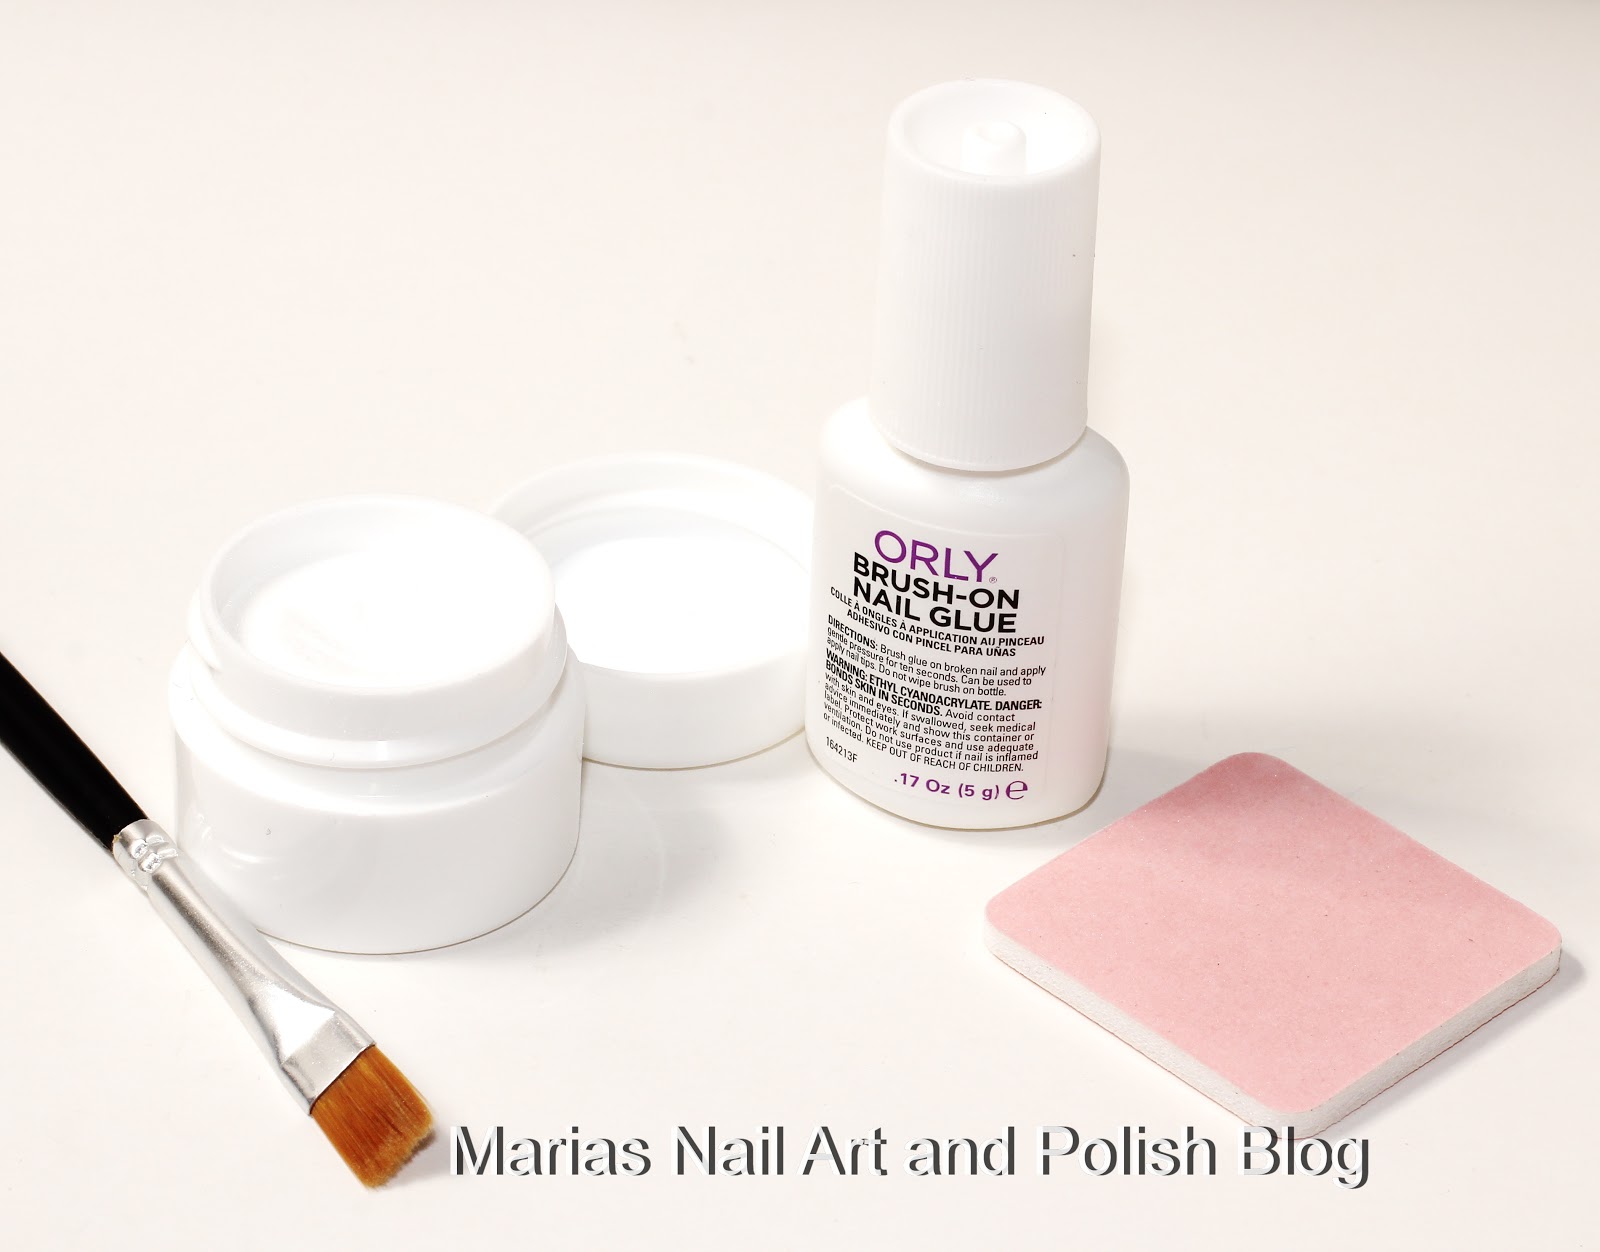 Marias Nail Art and Polish Blog: Orly Nail Rescue - 1½ months with the